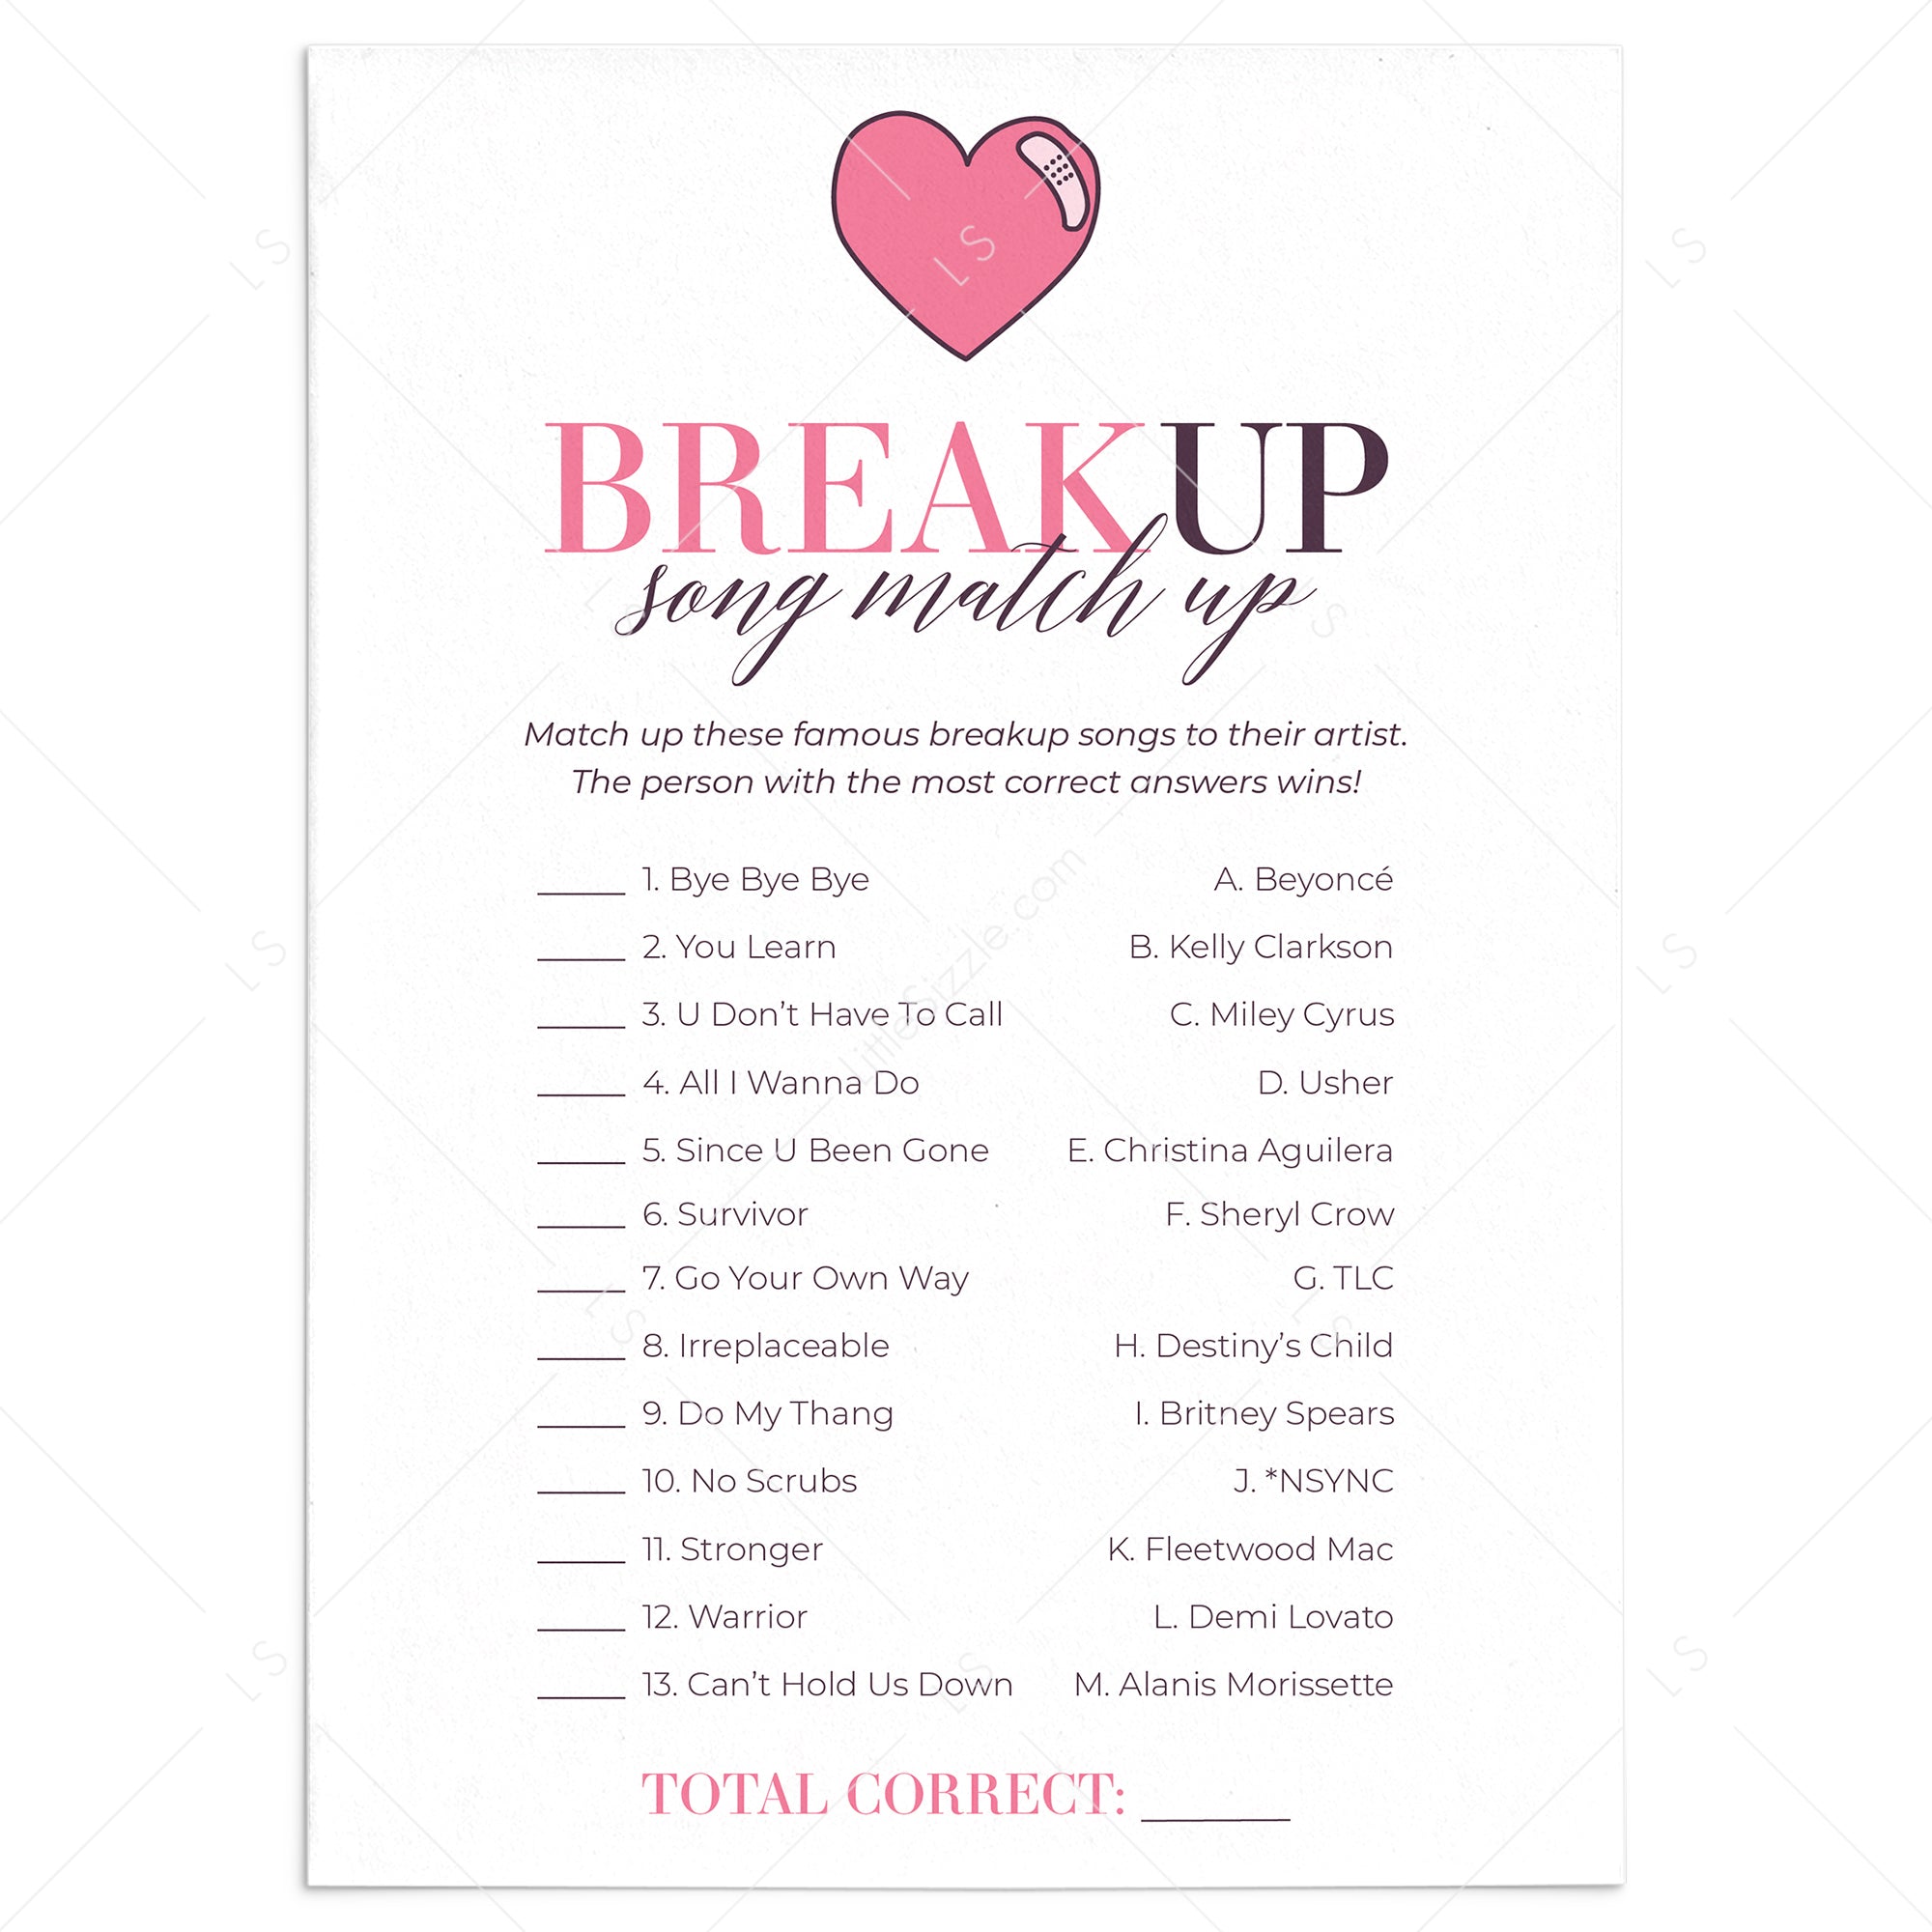 Breakup Songs Match Up with Answer Key Printable Breakup Party Ideas